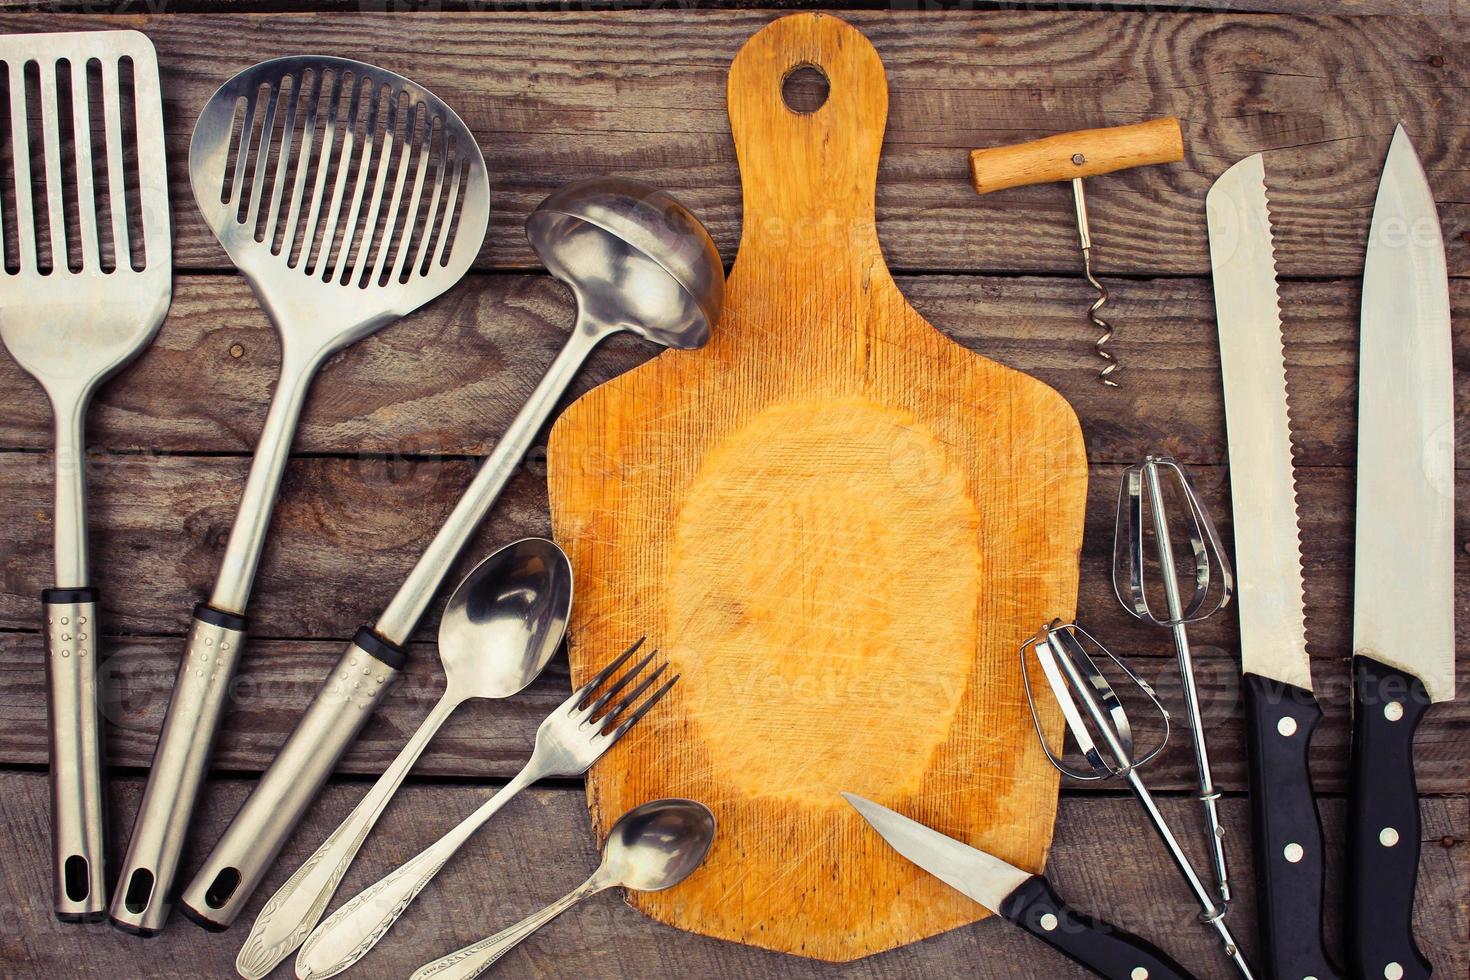 Rustic kitchen utensils on wooden table for homemade meal preparation  generated by AI 24926282 Stock Photo at Vecteezy